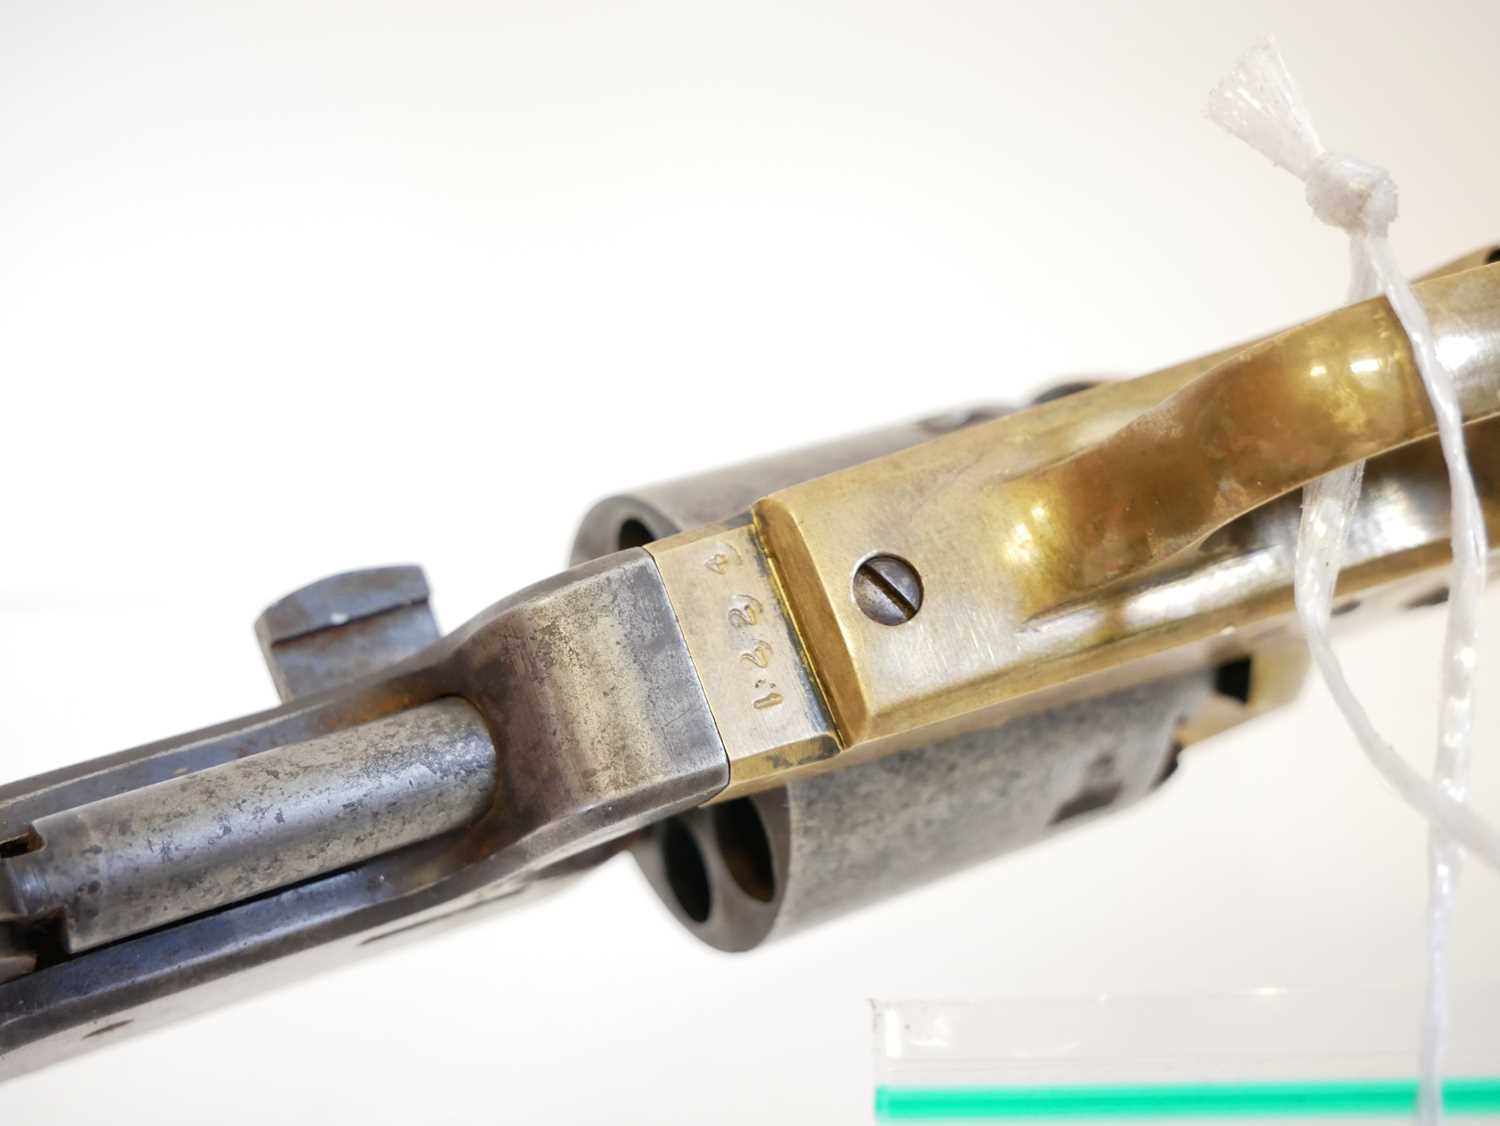 Deactivated Italian copy of a brass frame Colt navy percussion revolver, 7.5inch barrel, no serial - Image 4 of 7